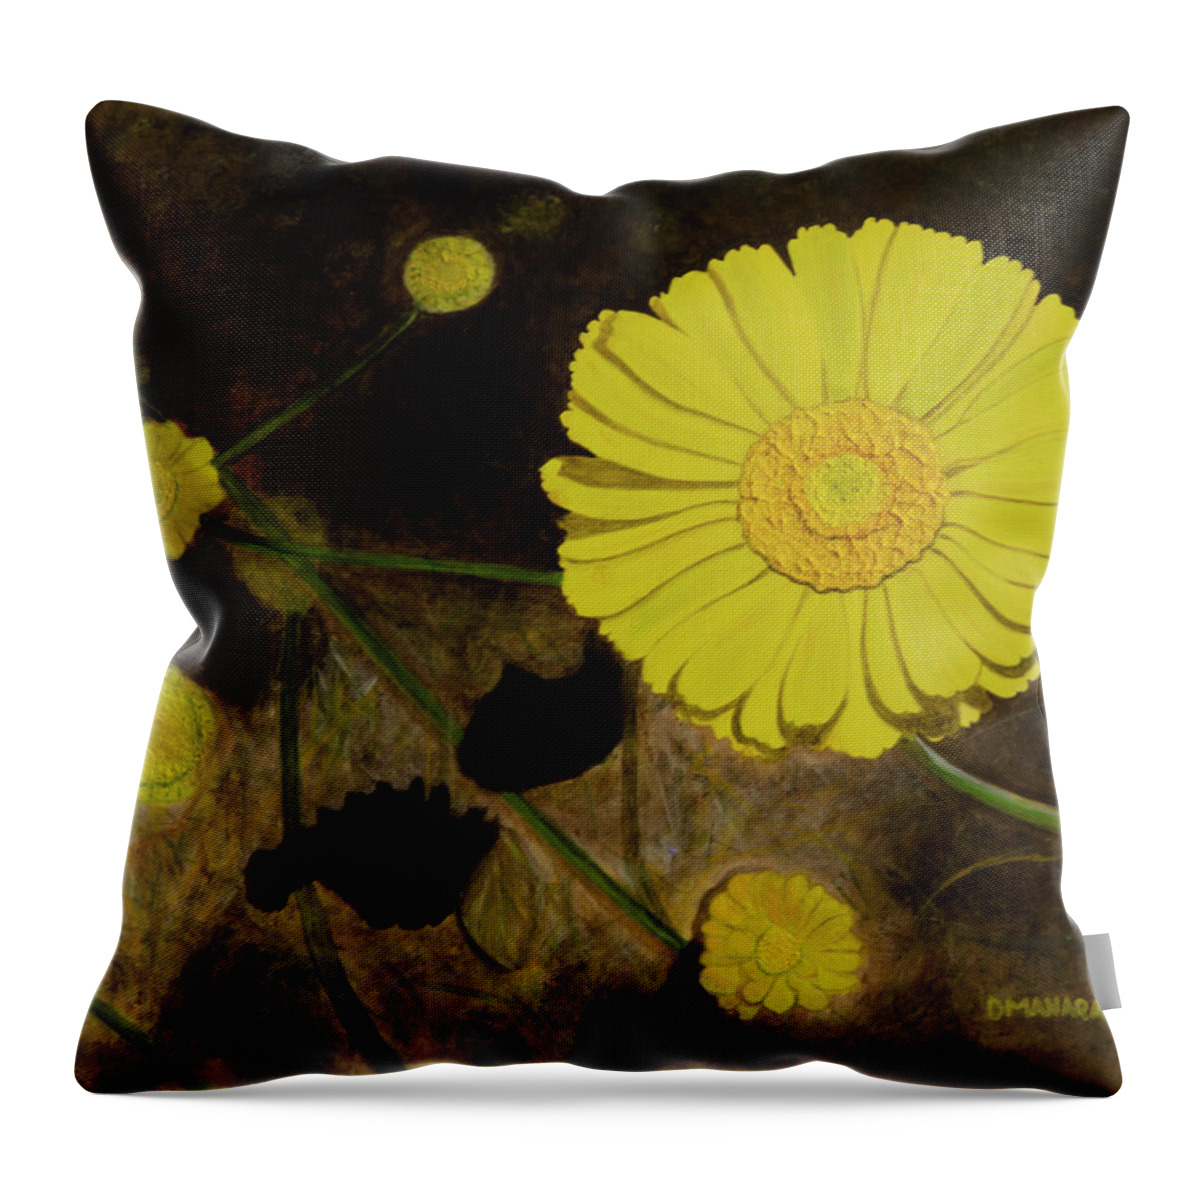 Floral Throw Pillow featuring the painting Arboretum Wildflower by Donna Manaraze